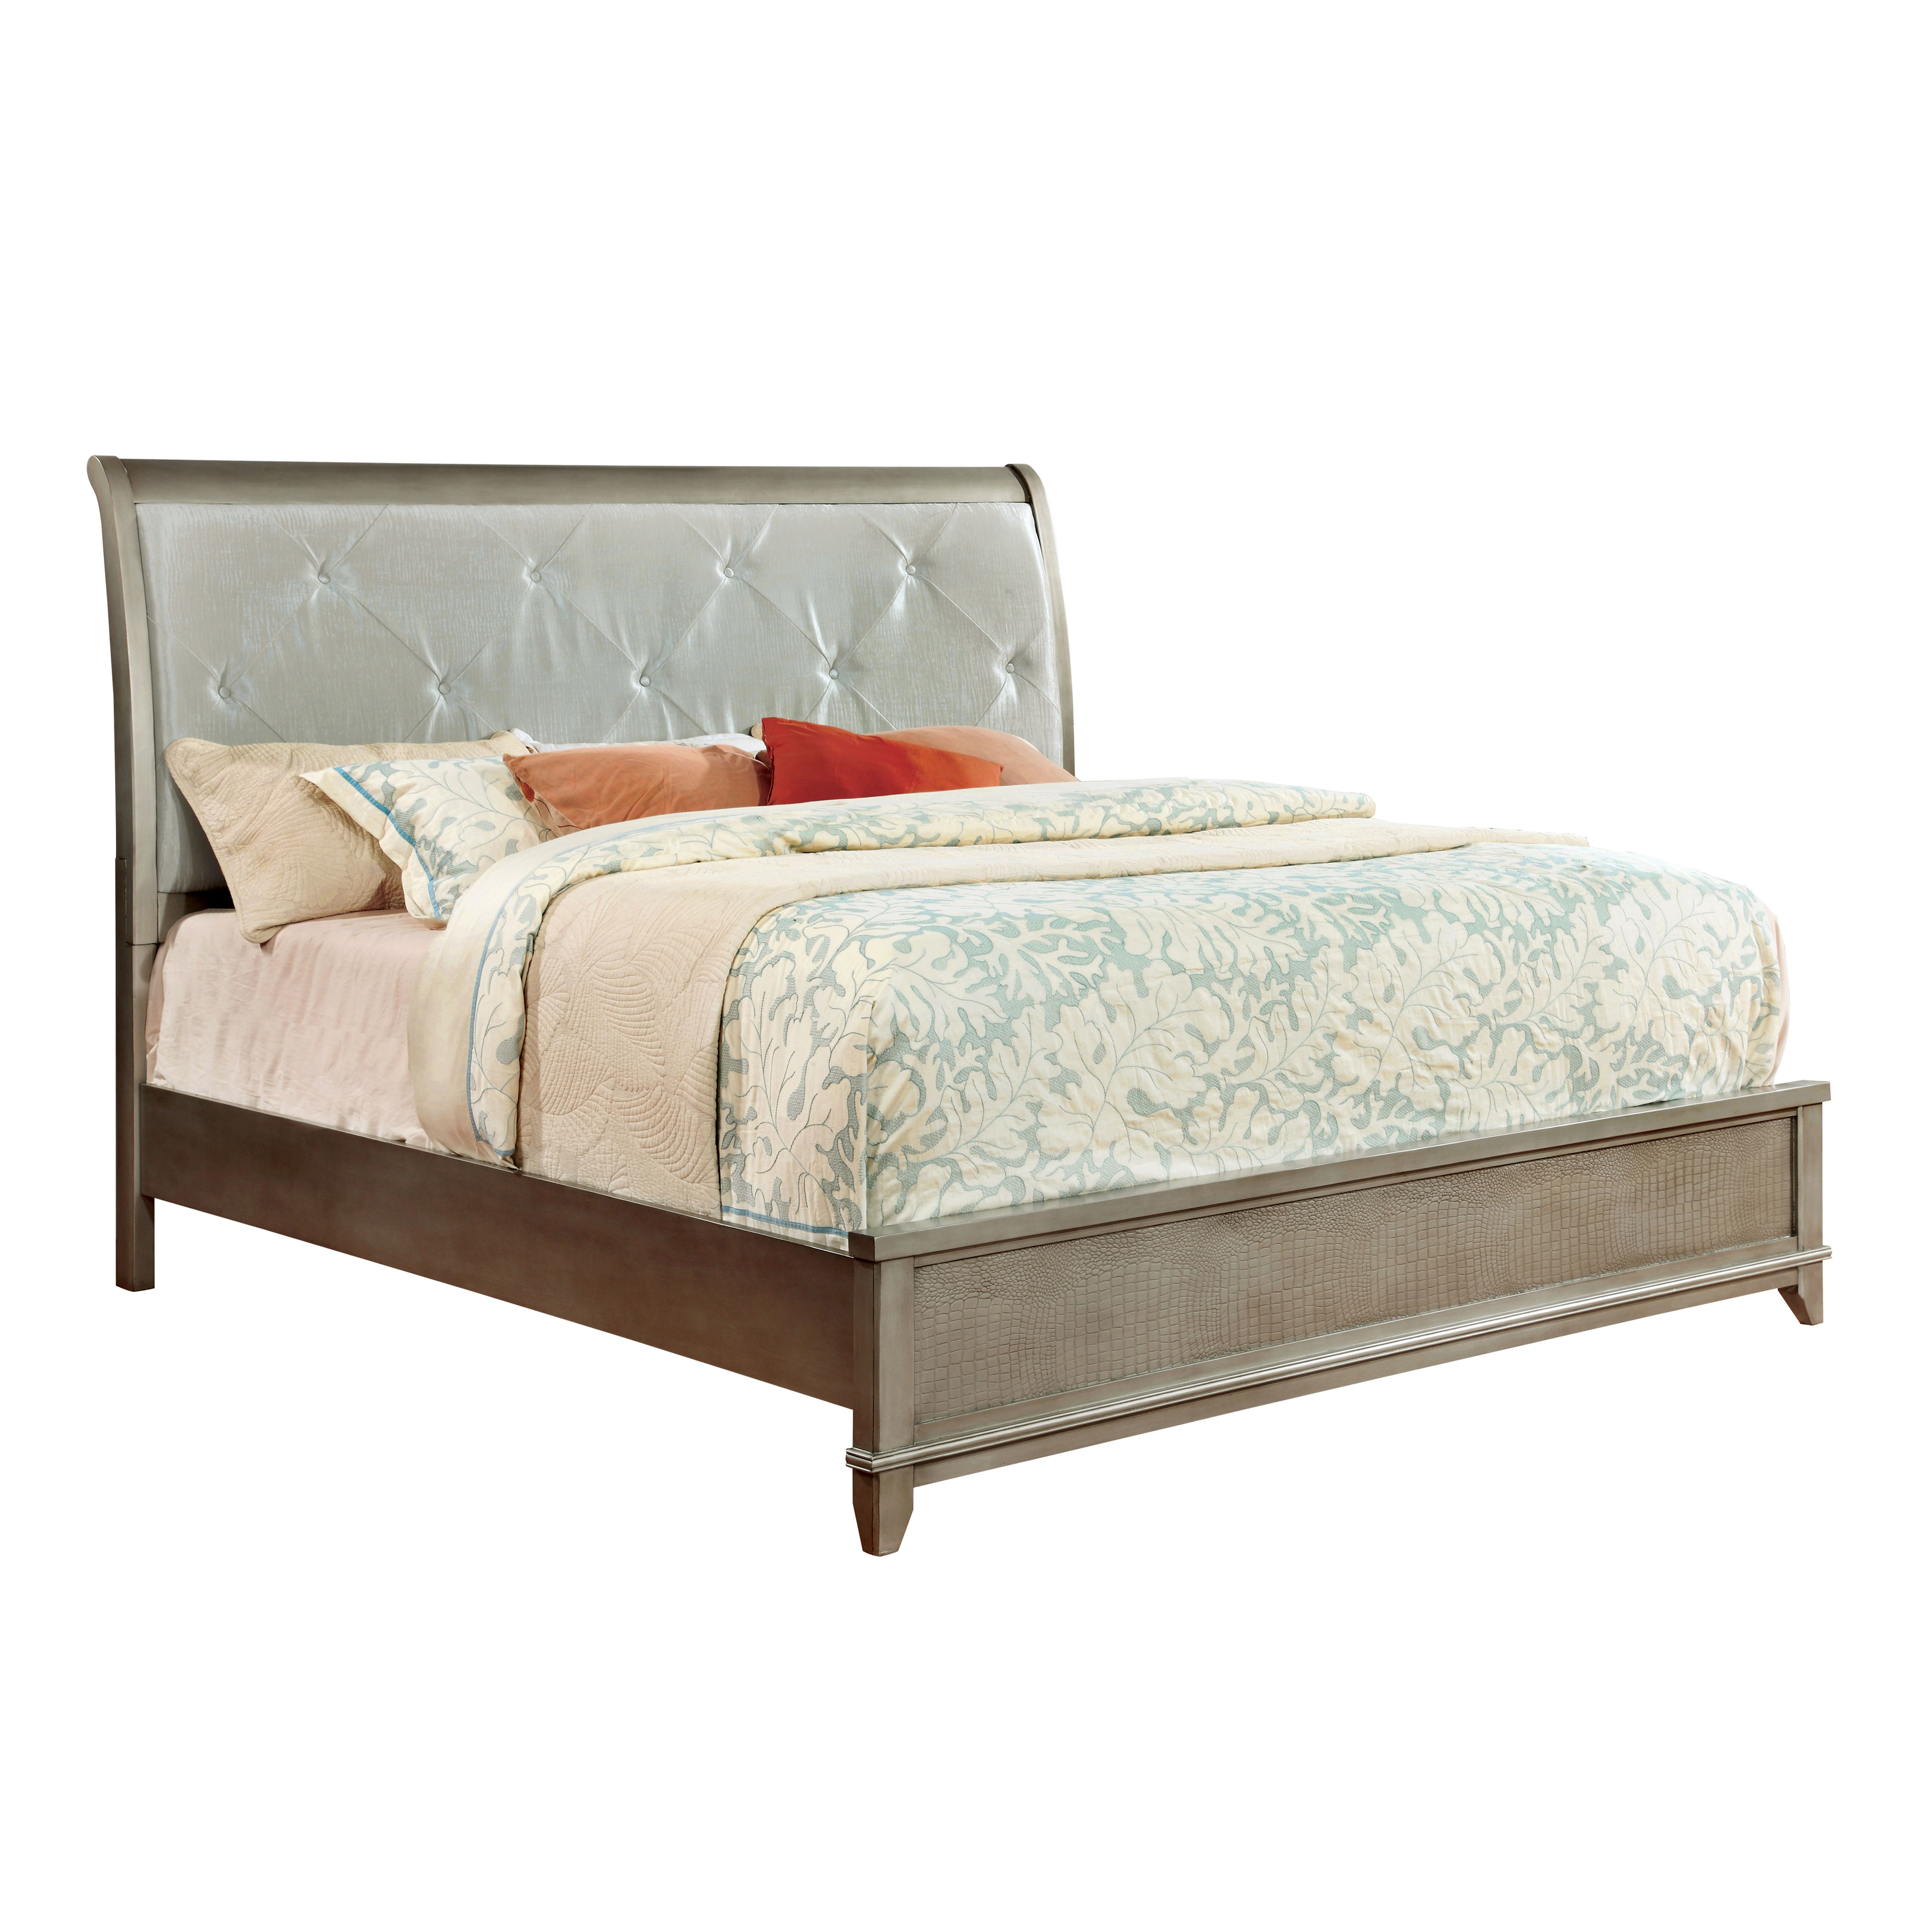 Furniture of America Harlan Platform Bed with Faux Leather Upholstered Headboard